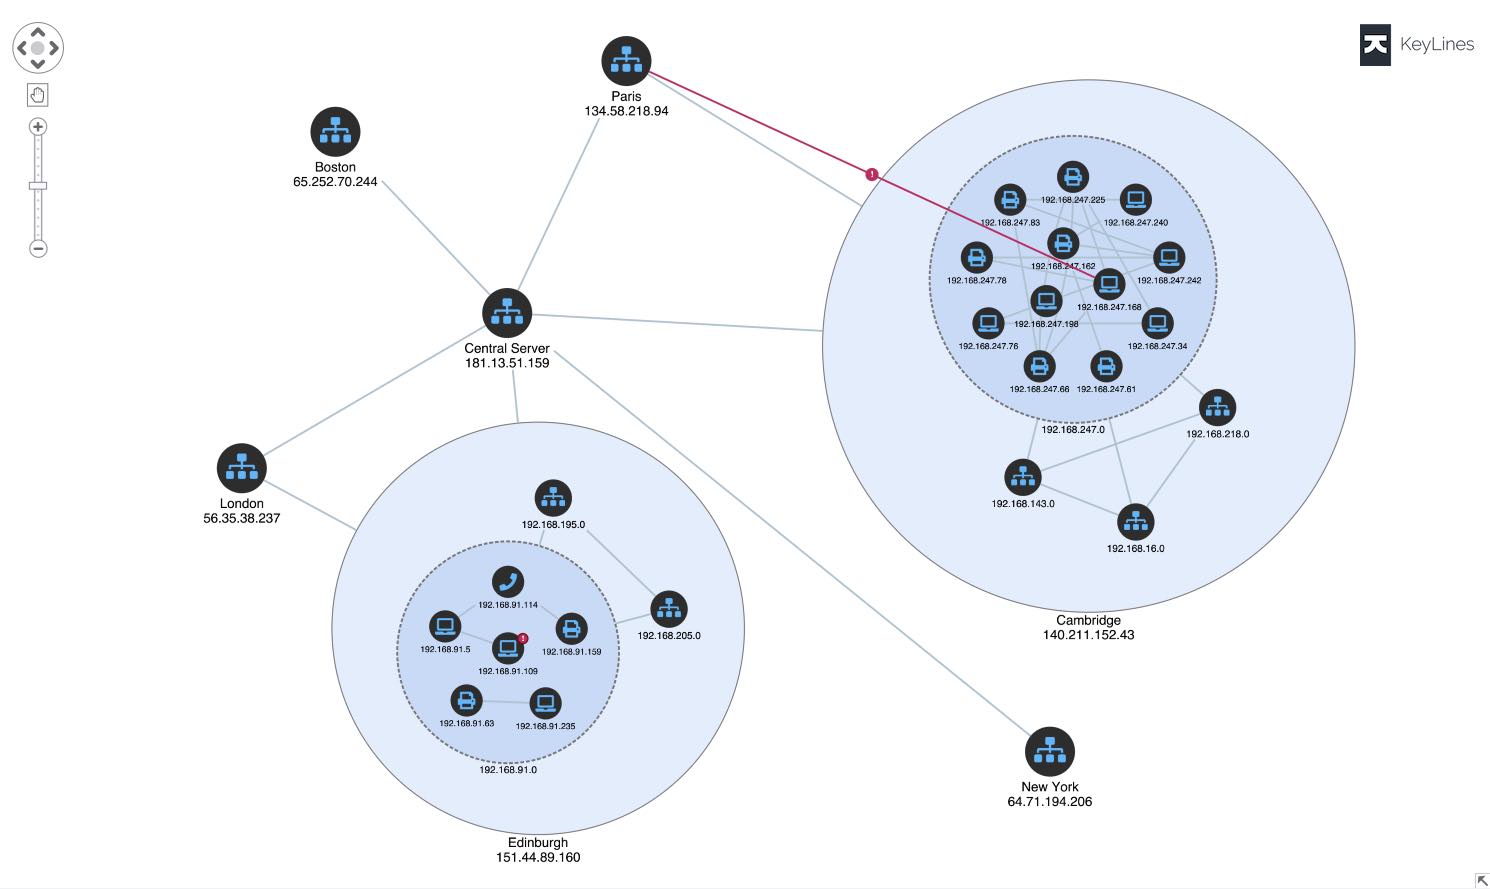 image visualizing the cyber threat analysis process